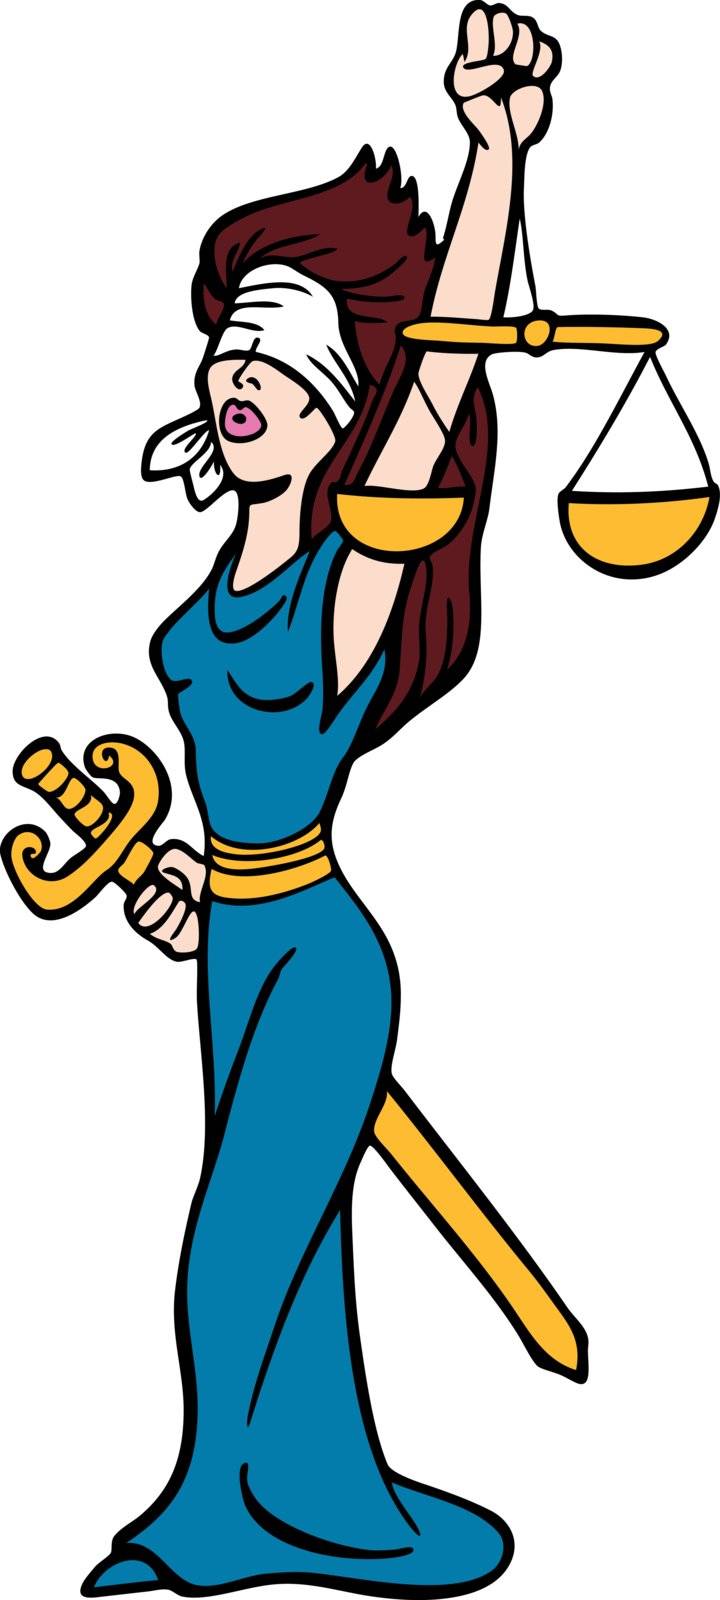 Image of lady representing justice.